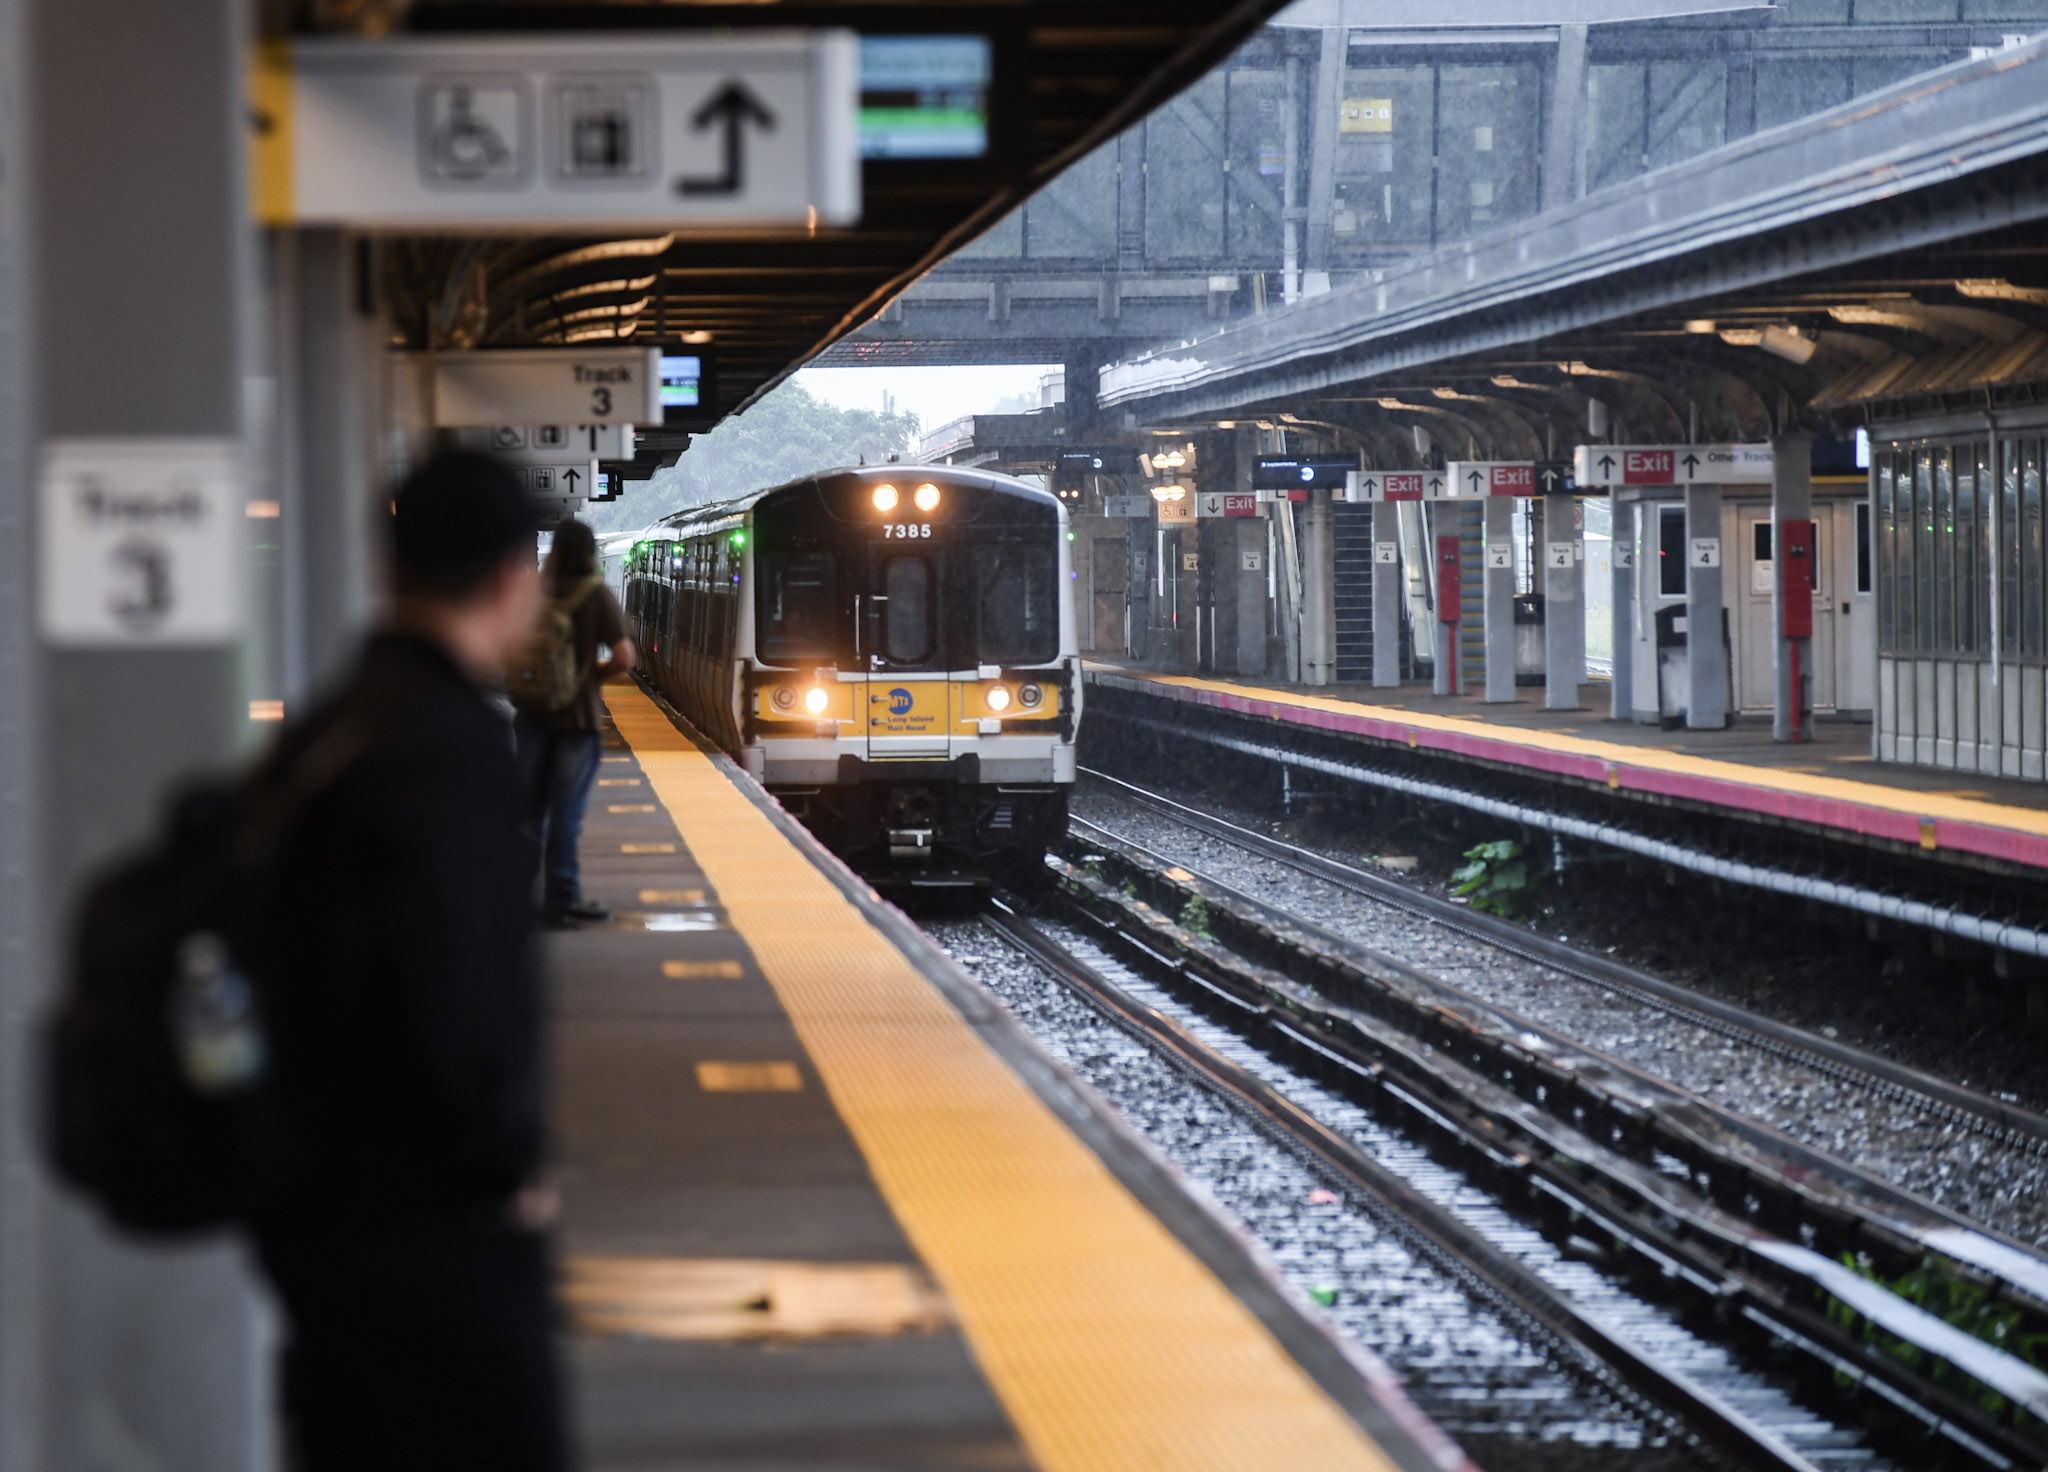 MTA Advises Customers Traveling to and from Jamaica and JFK AirTrain of E Train Suspension, LIRR to Cross-Honor MetroCards